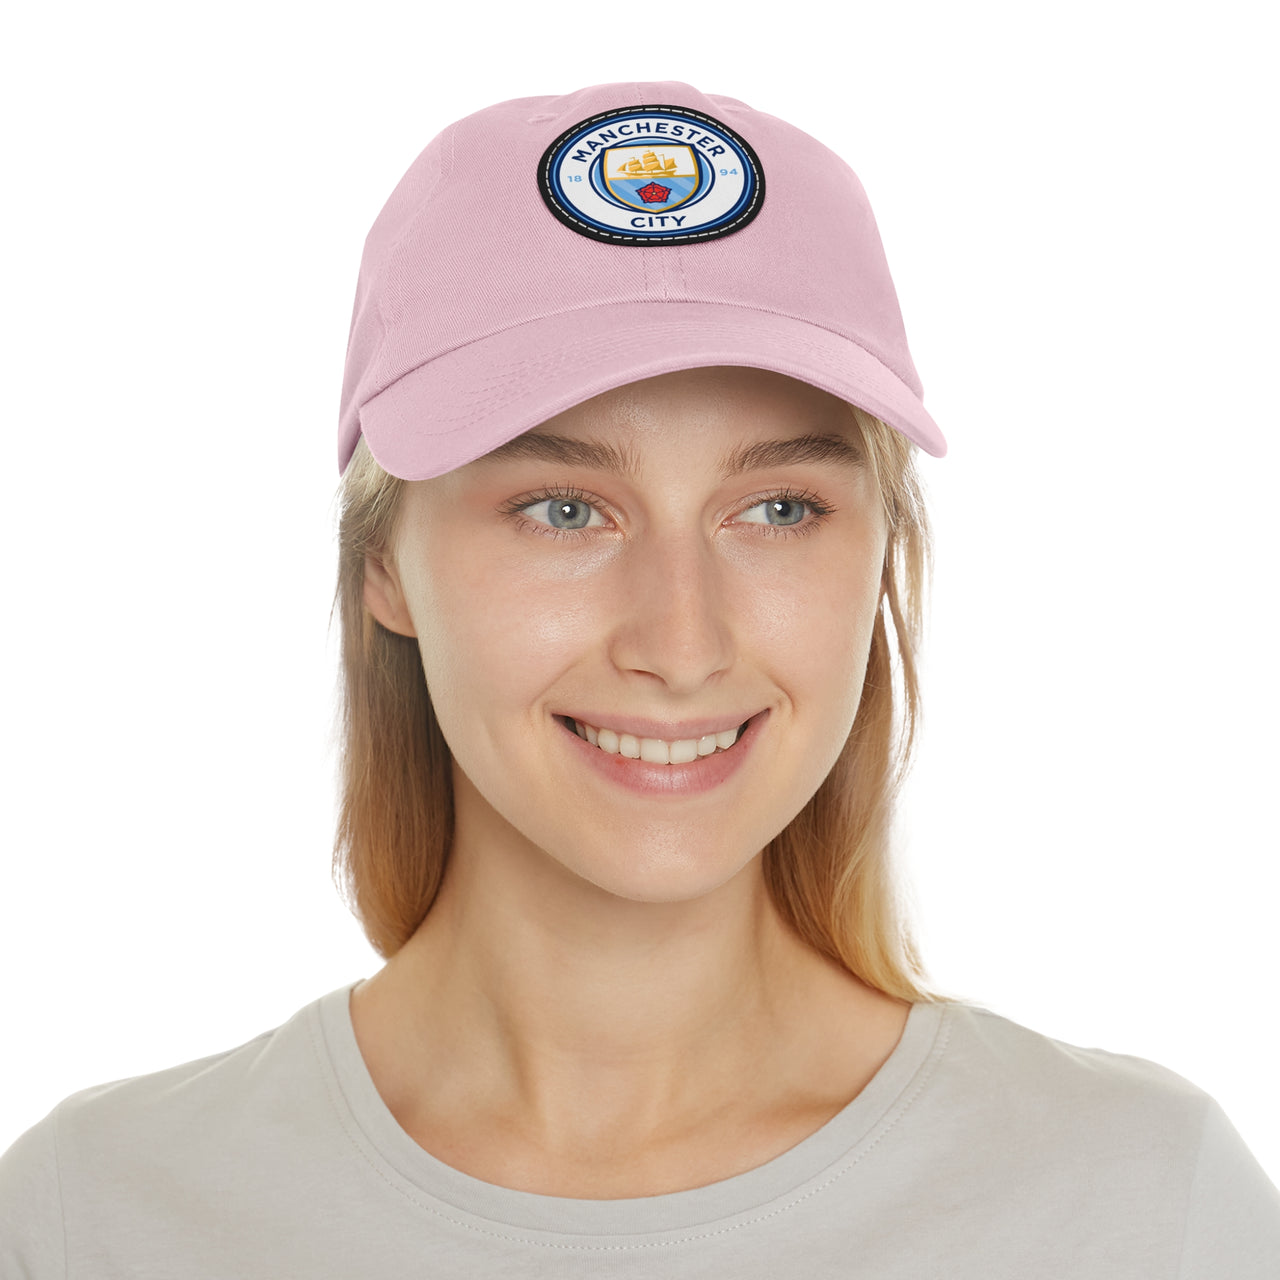 Manchester City Dad Hat with Leather Patch (Round)